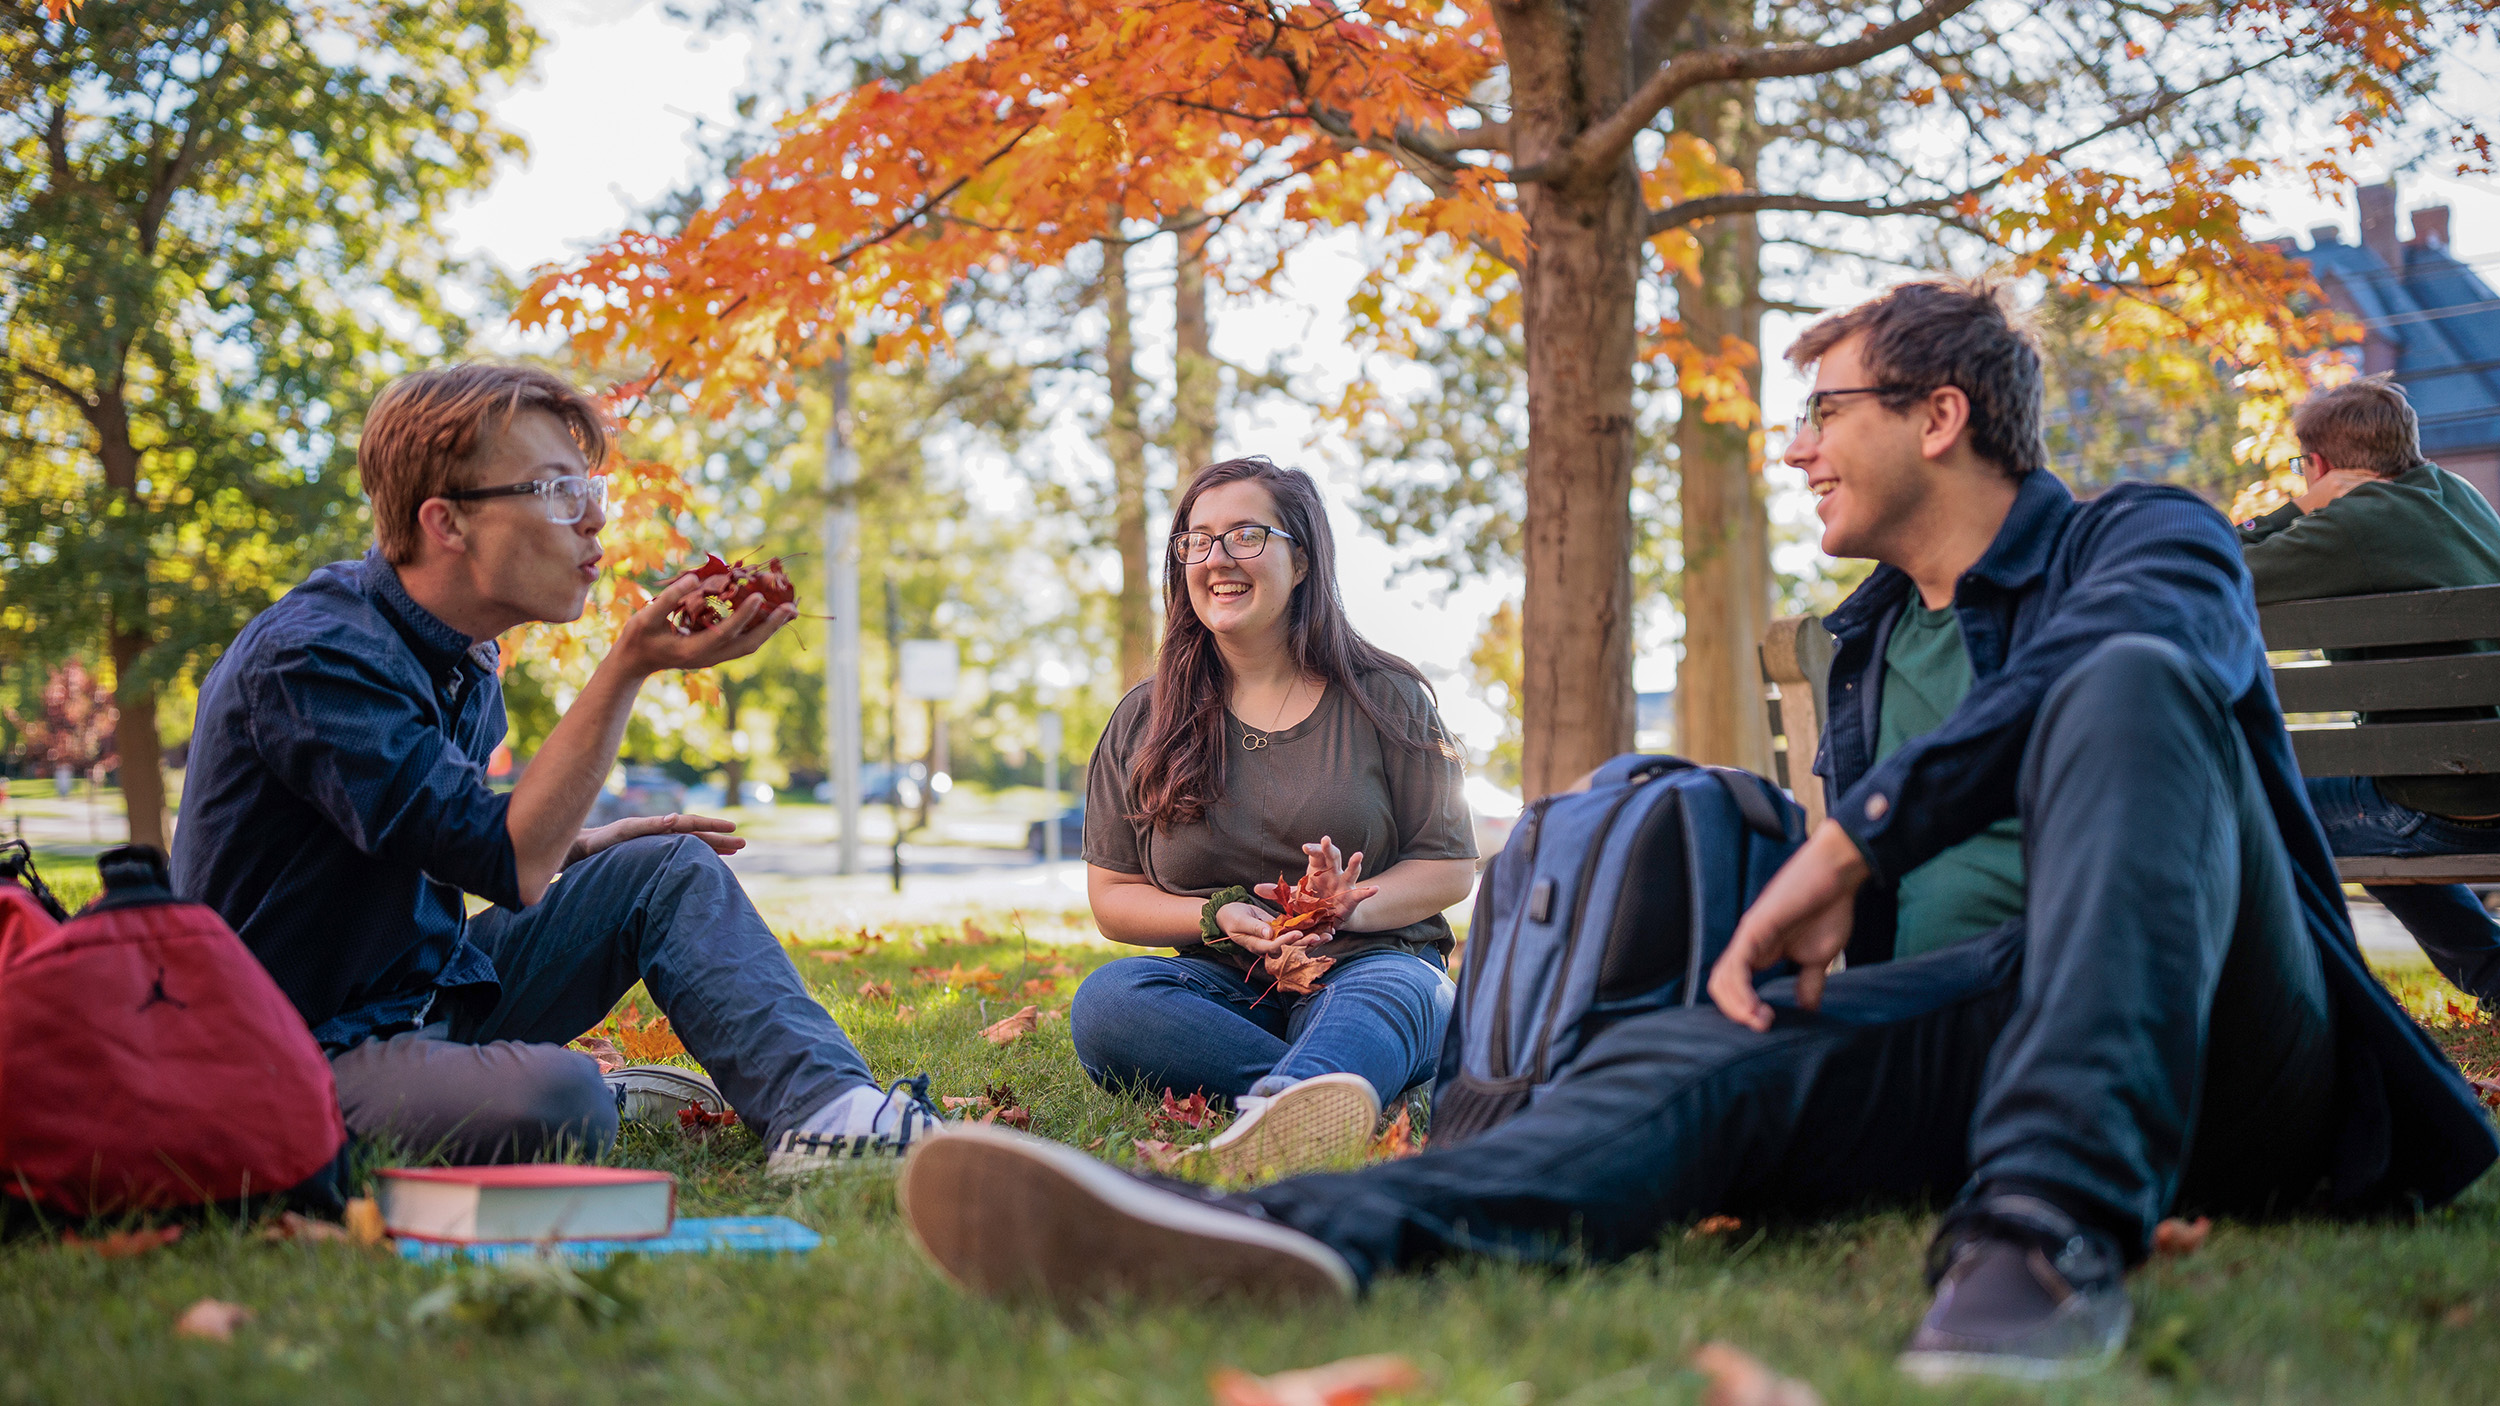 group of students site on the lawn during fall play with leaves